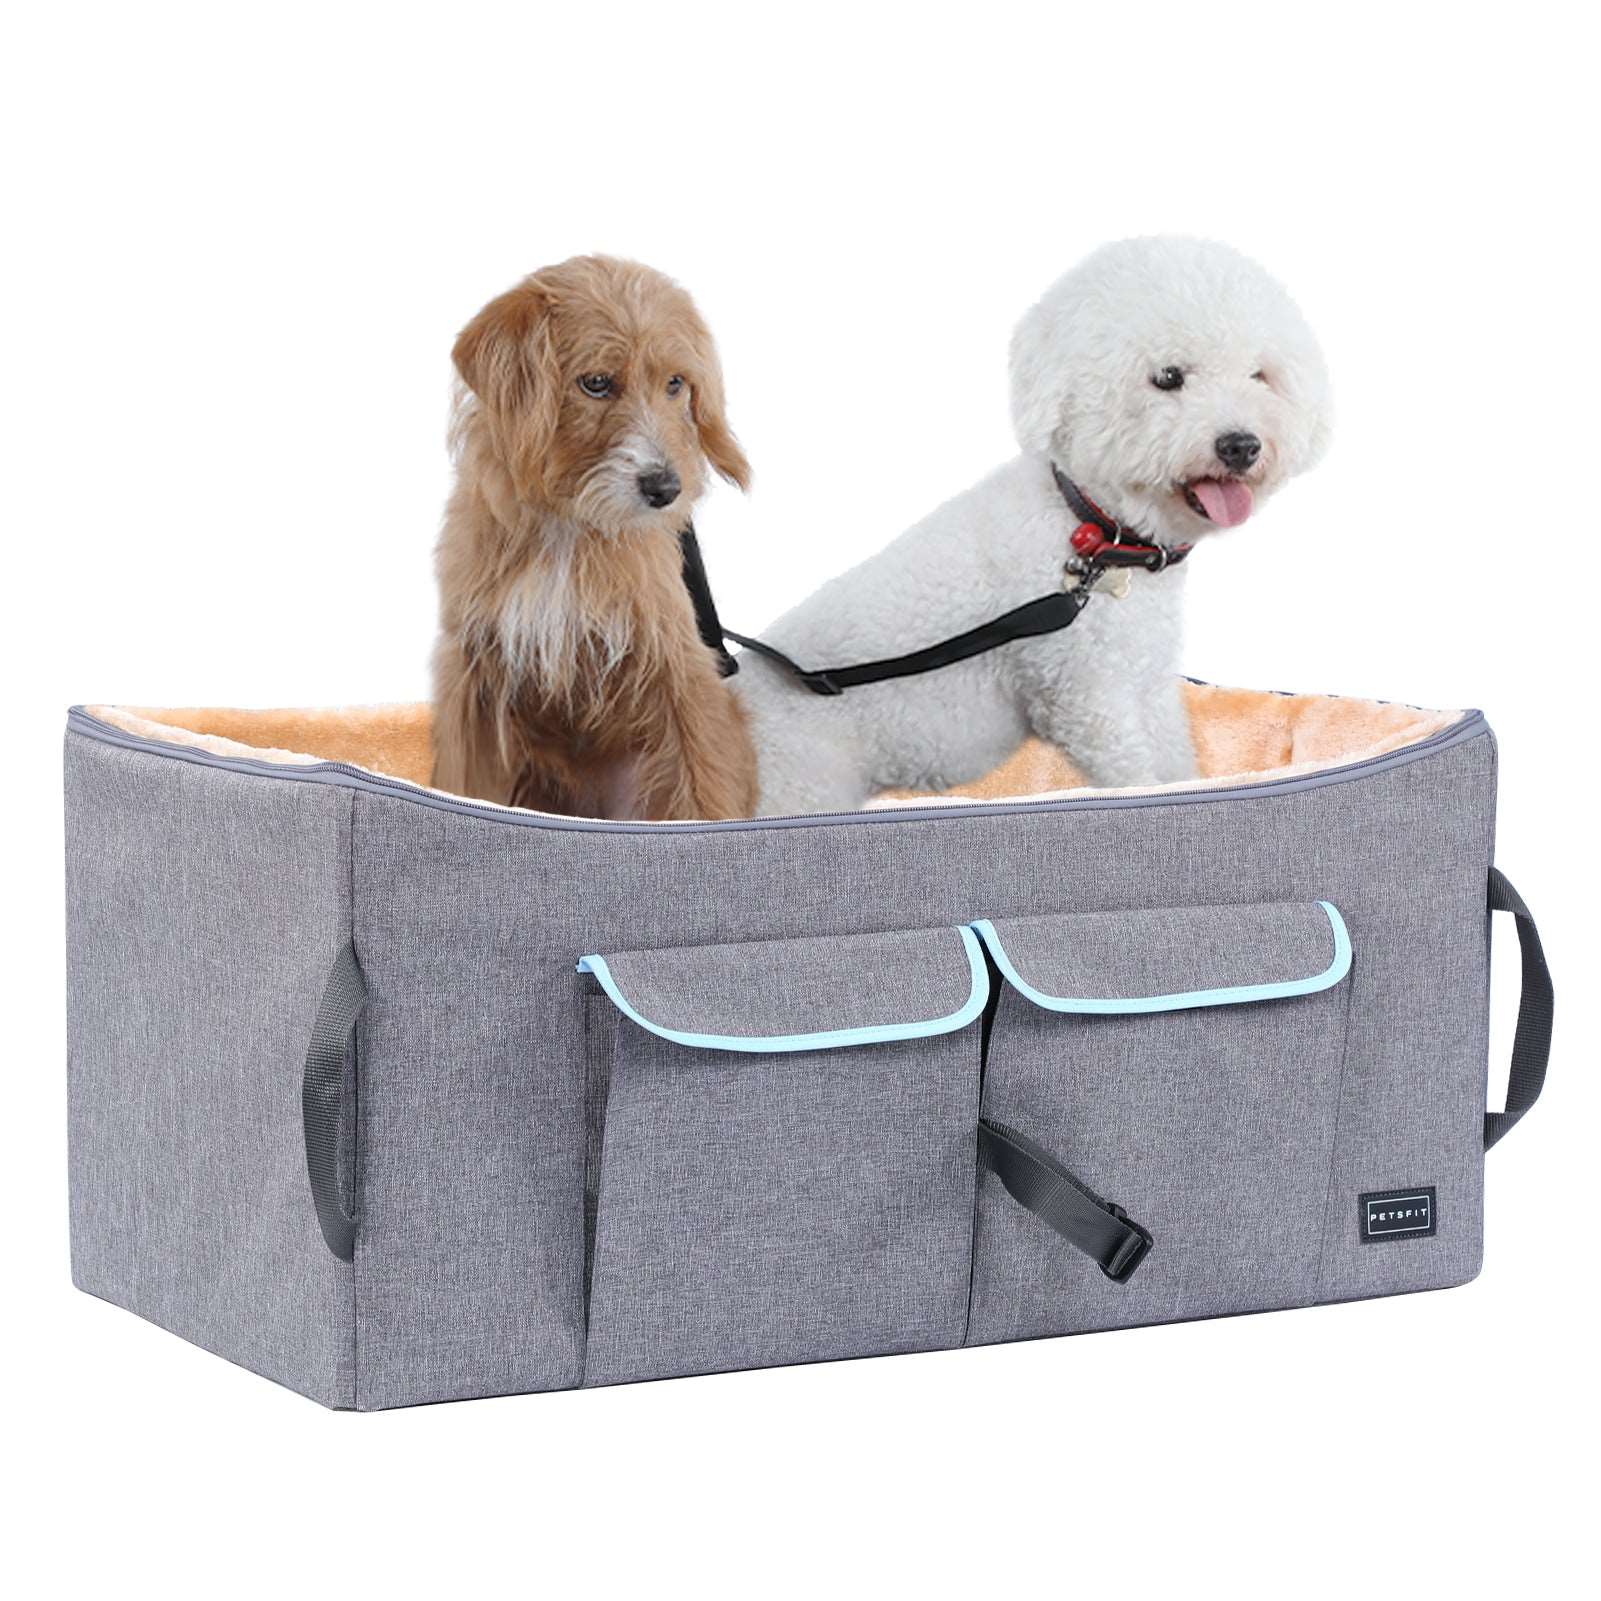 PETSFIT Dog Car Seat Pet Travel Car Booster Seat with Safety Belt